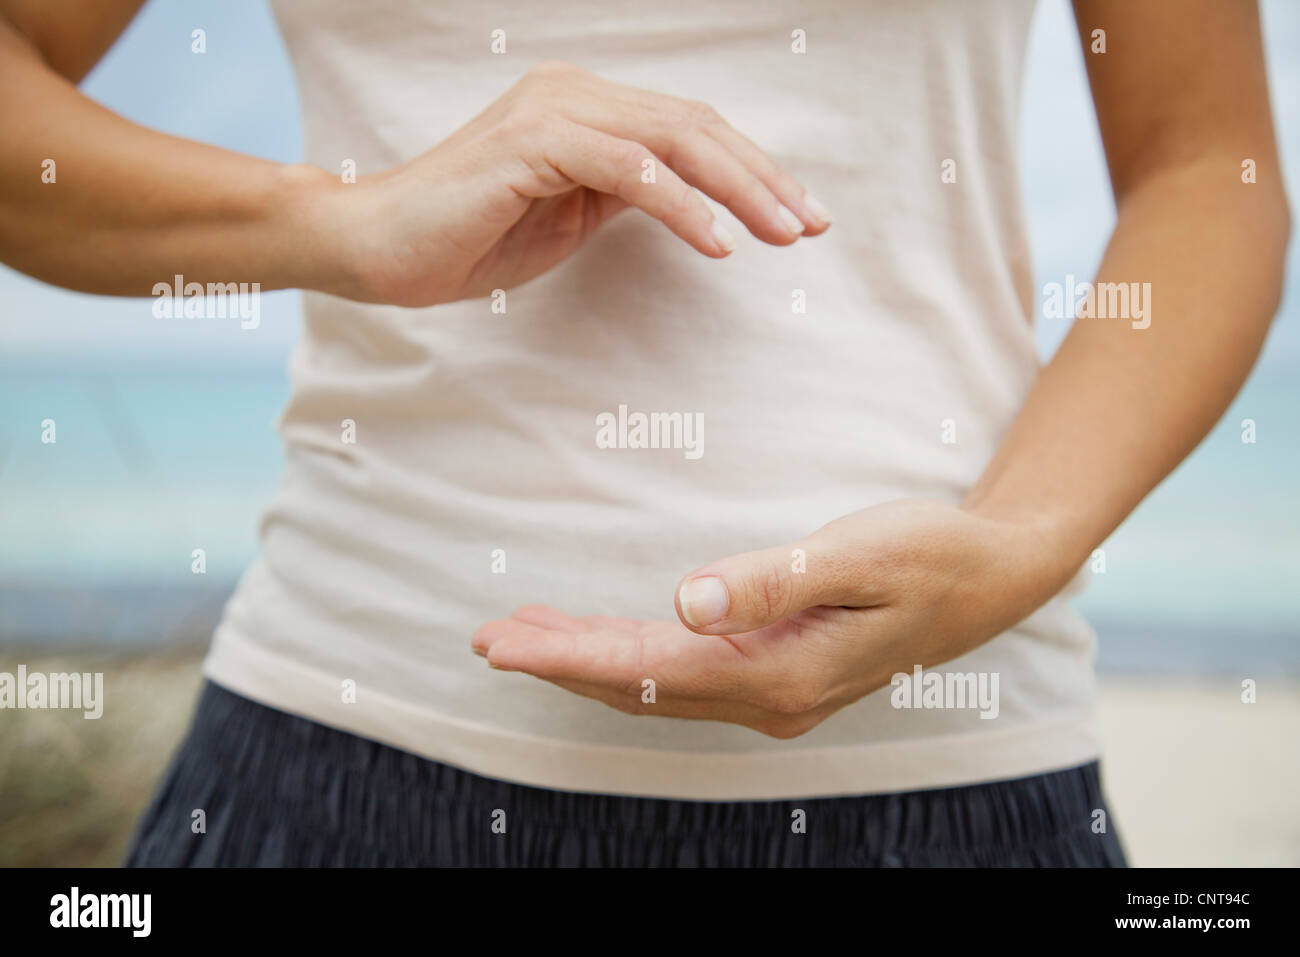 Woman doing 'hold the ball' tai chi chuan move, mid section Stock Photo